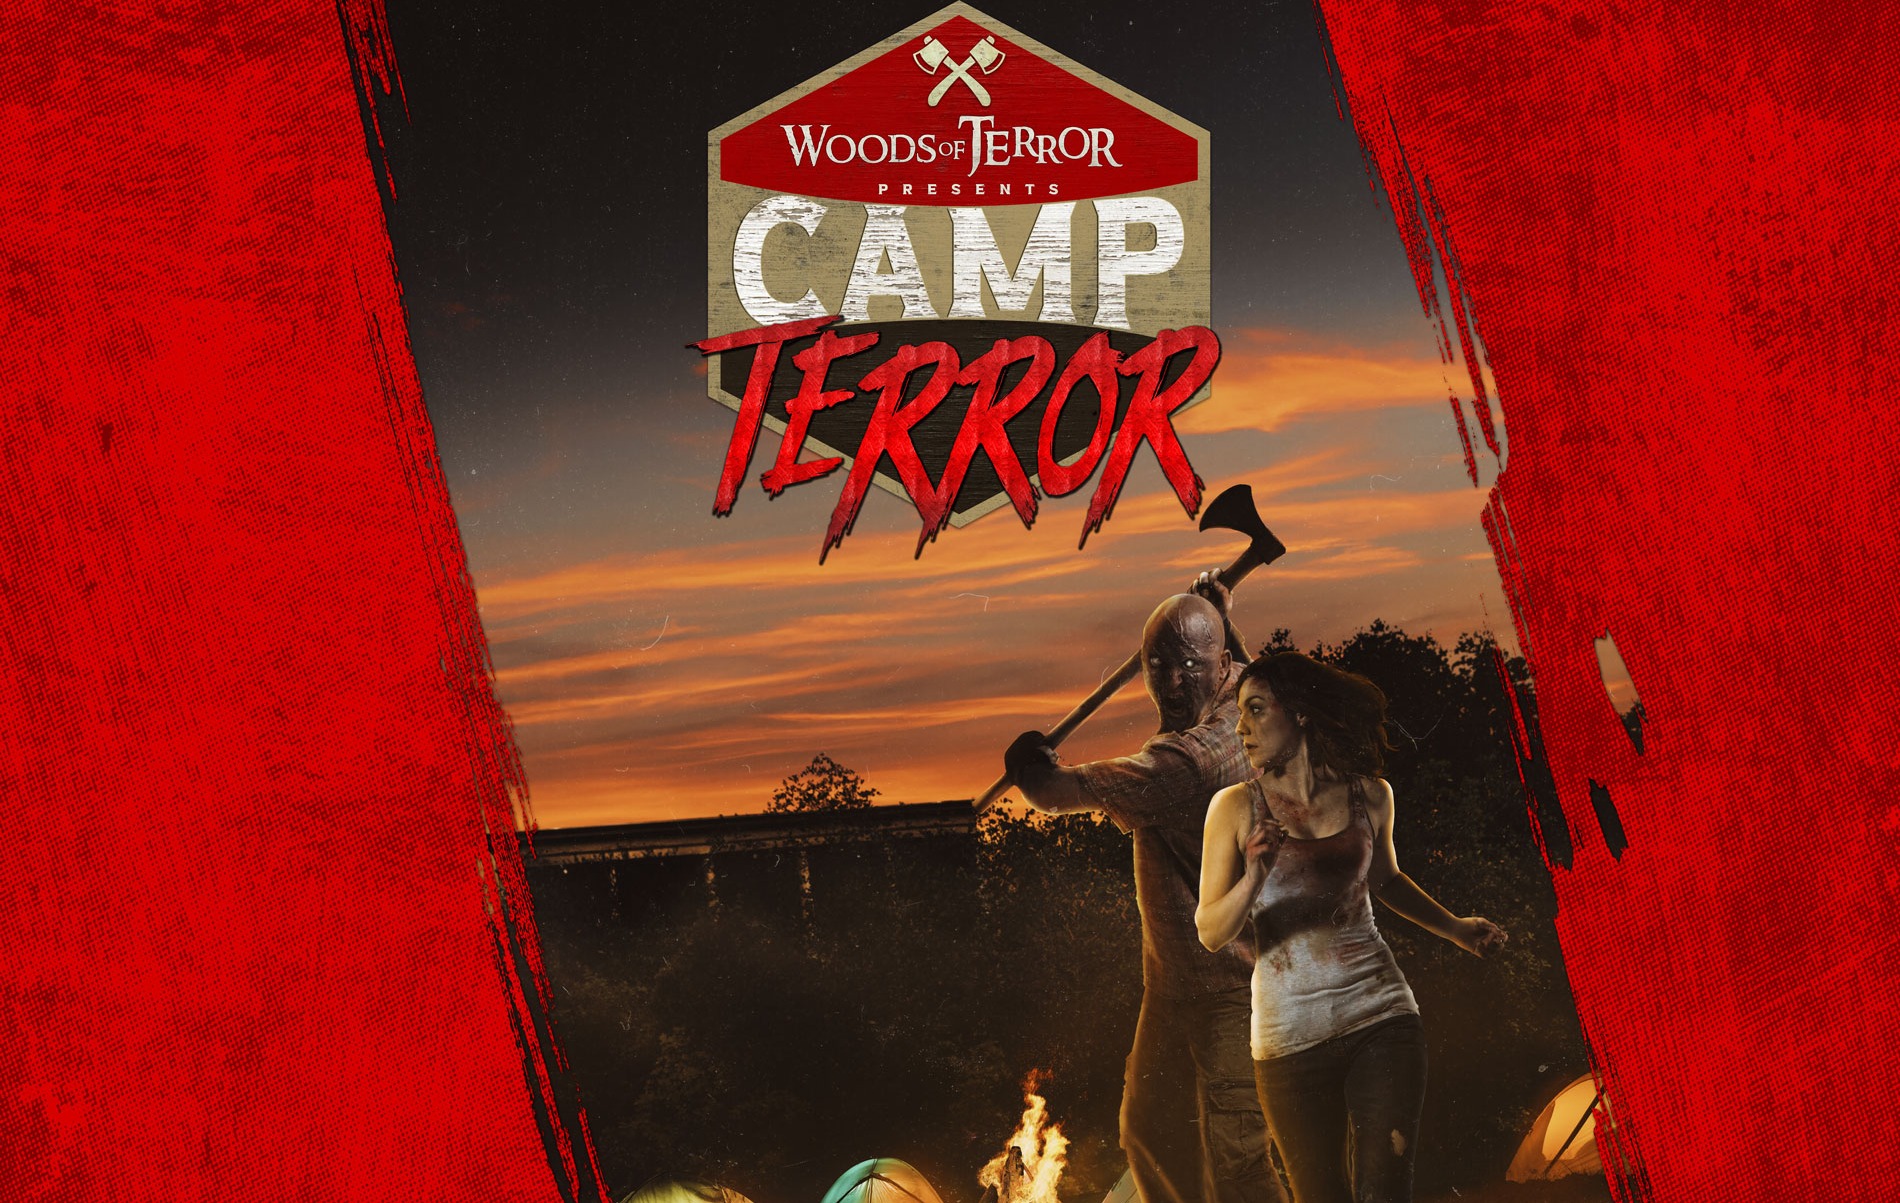 Woods Of Terror Camp Terror Tickets Mclaurin Farms